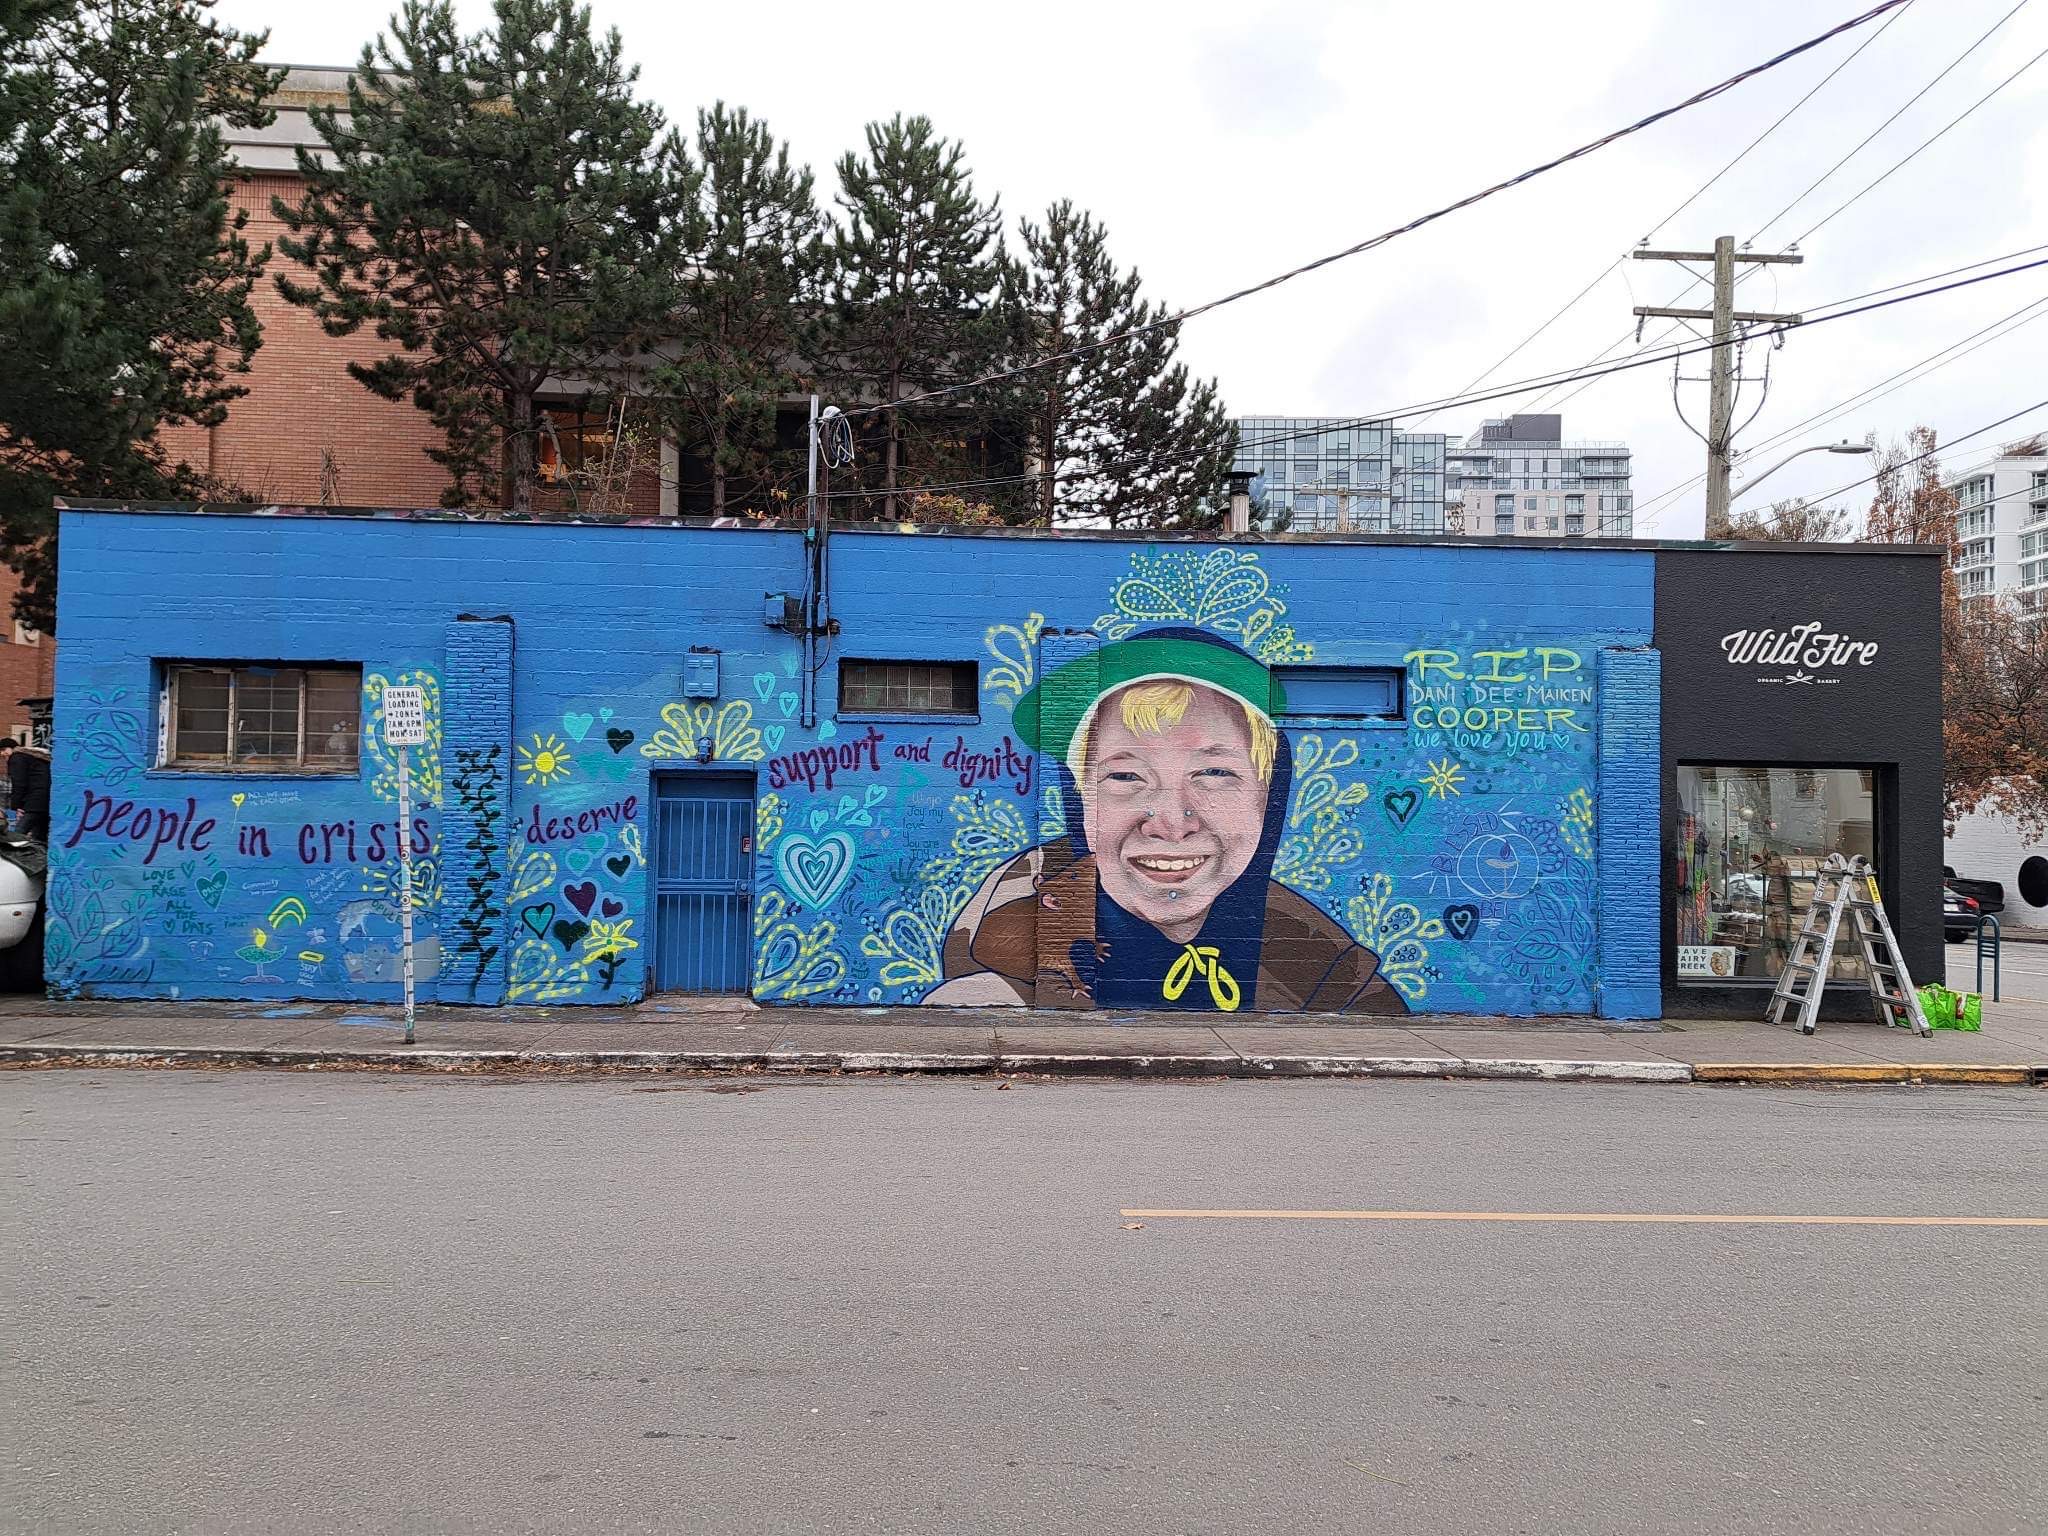 A mural painted in honour of Dani Cooper, who was shot and killed by North Vancouver police officers.